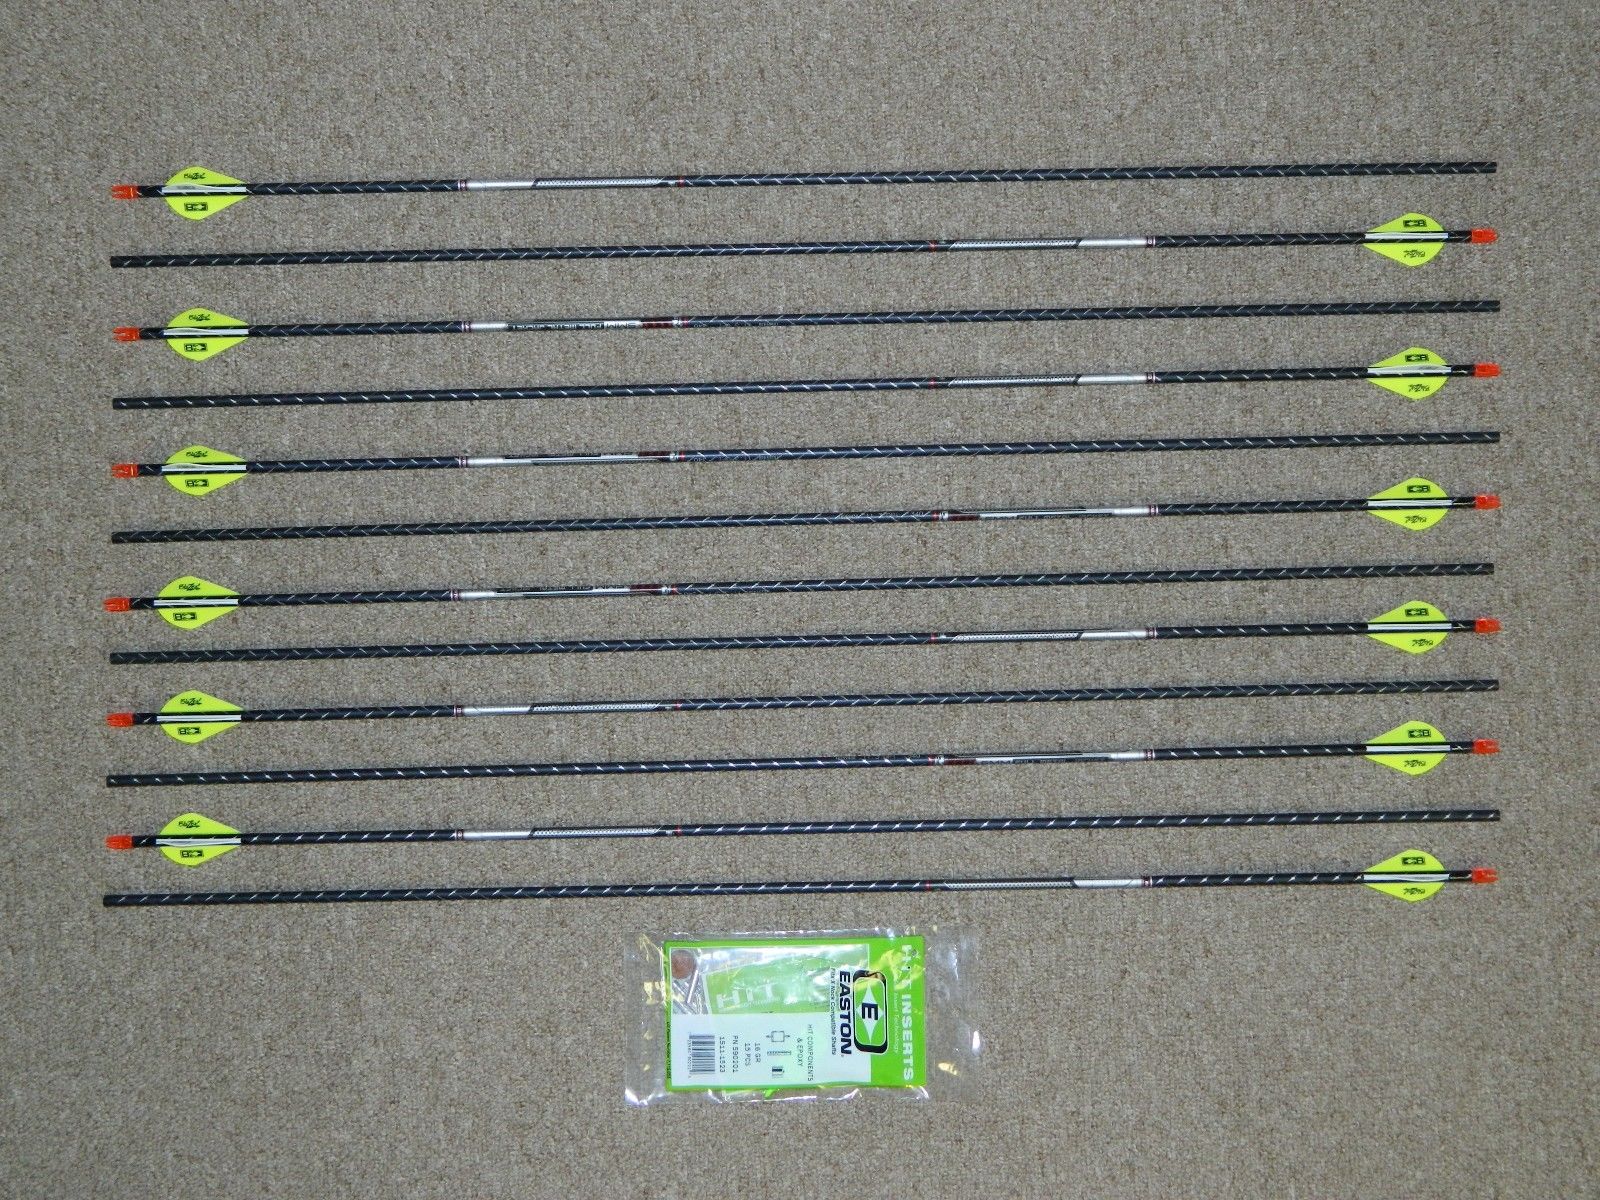 Easton 5mm FMJ Pro 340 Arrows Factory Fetched w/ 2" Blazer Vanes 6 Pack 